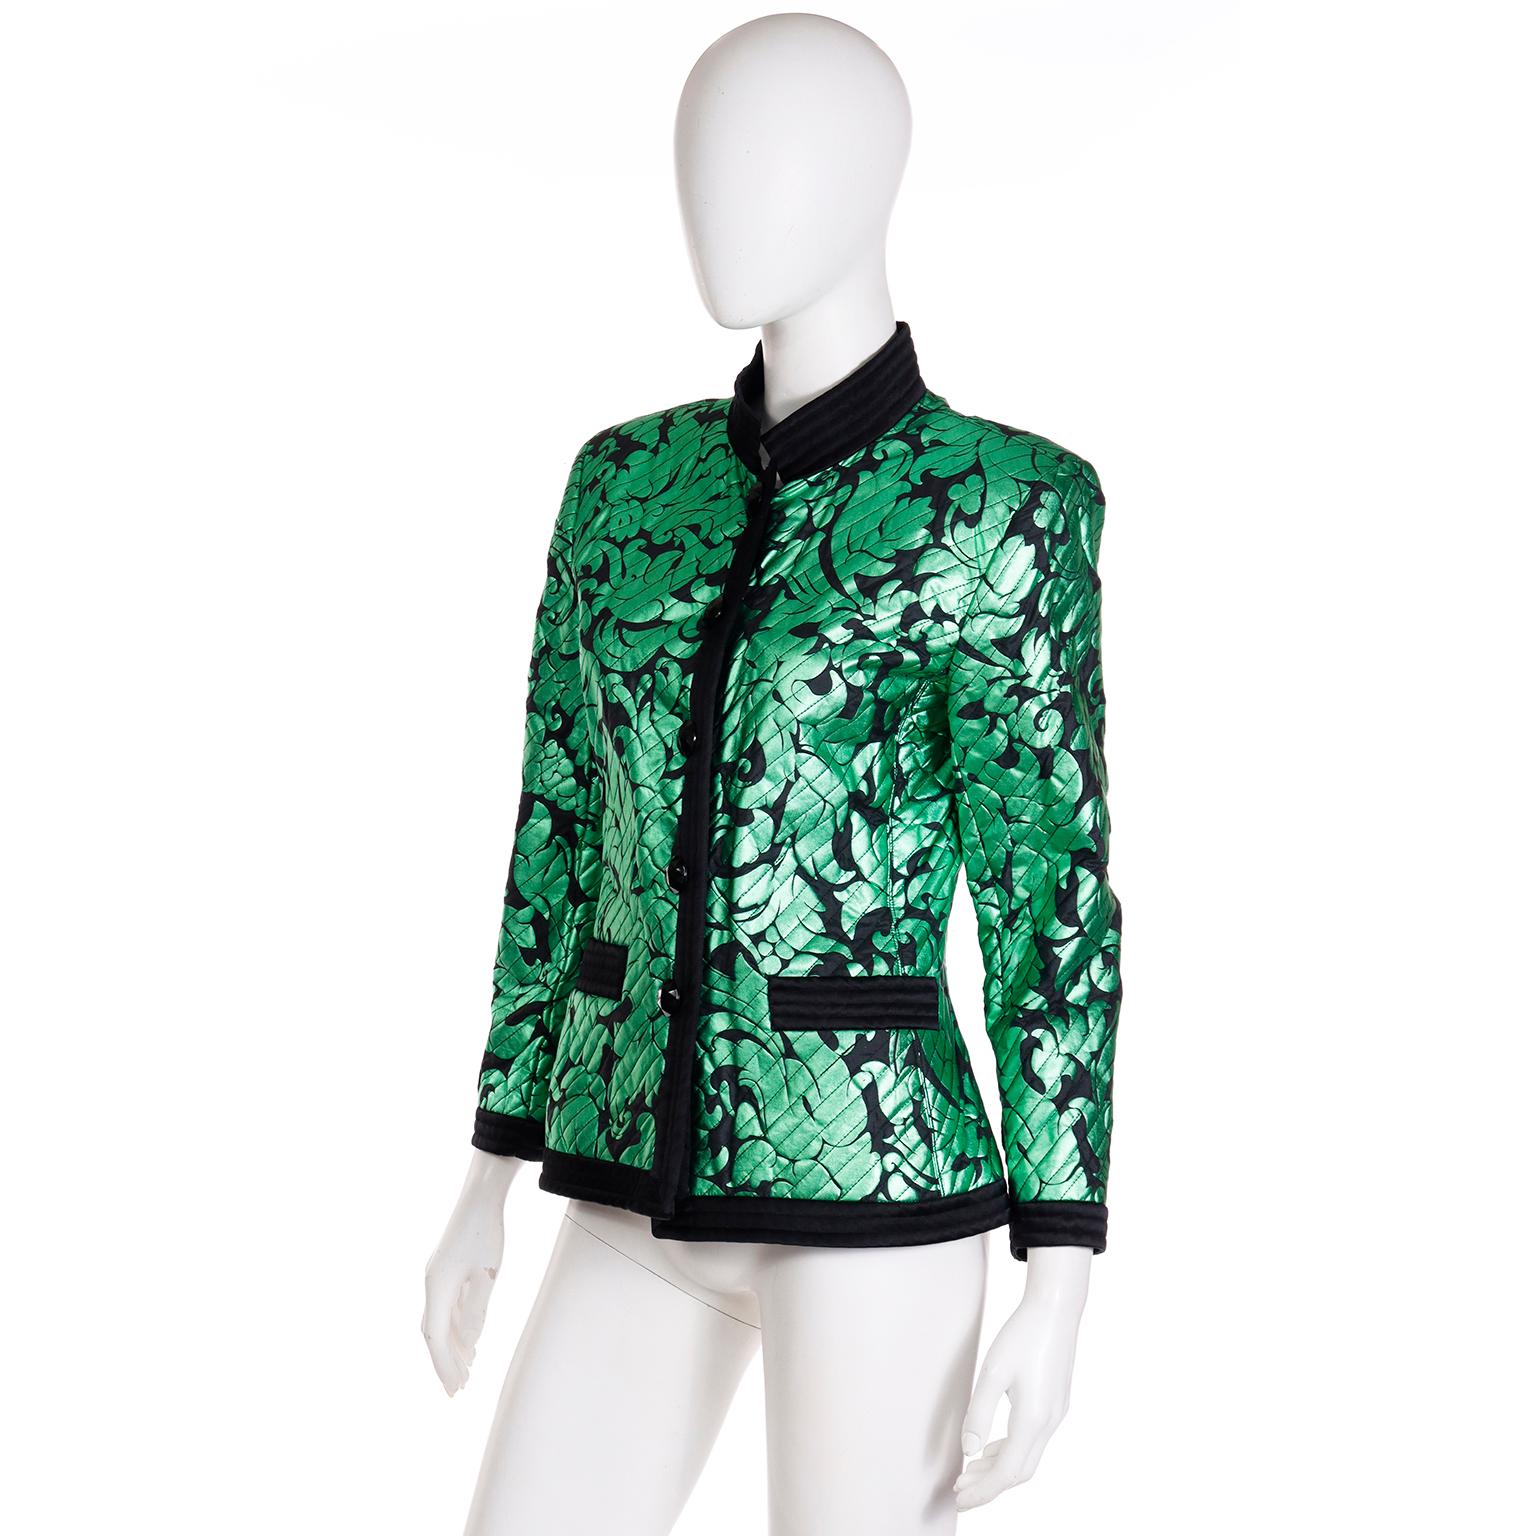 Yves Saint Laurent F/W 1986 / 87 Green Lame Jacket with Quilted Black Satin Trim 2